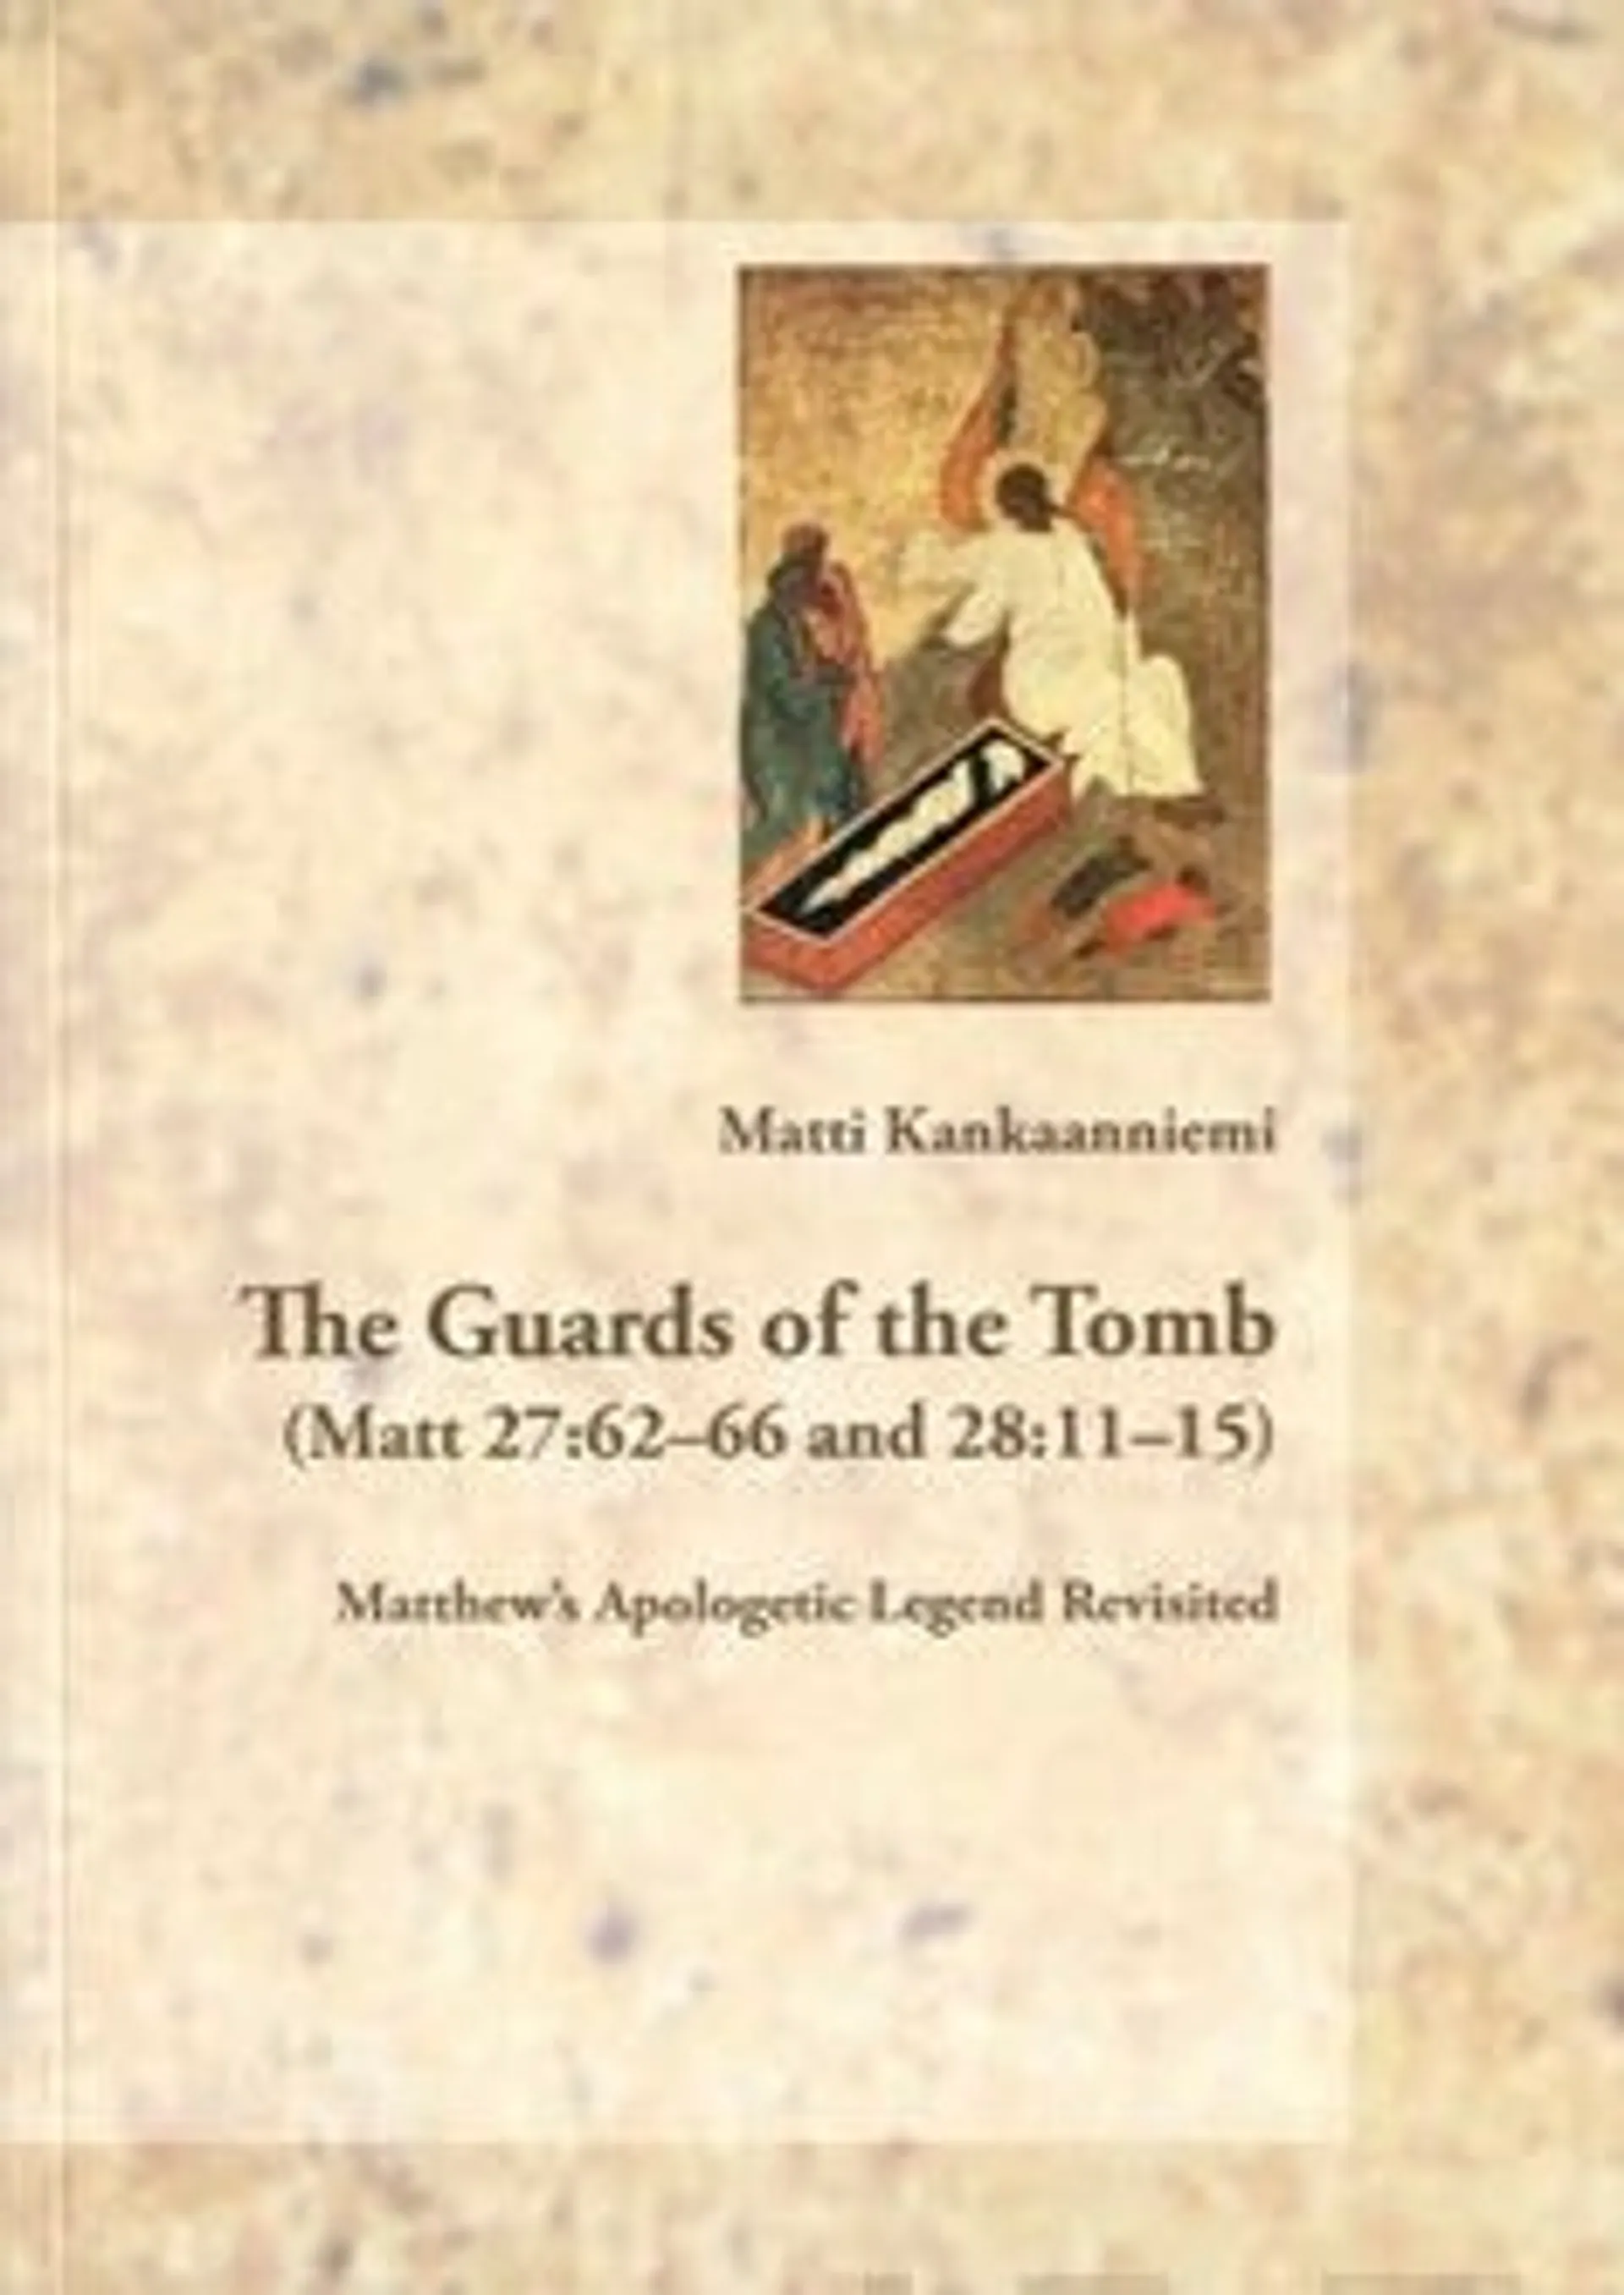 Kankaanniemi, The Guards of the Tomb (Matt 27:62-66 and 28:11-15)